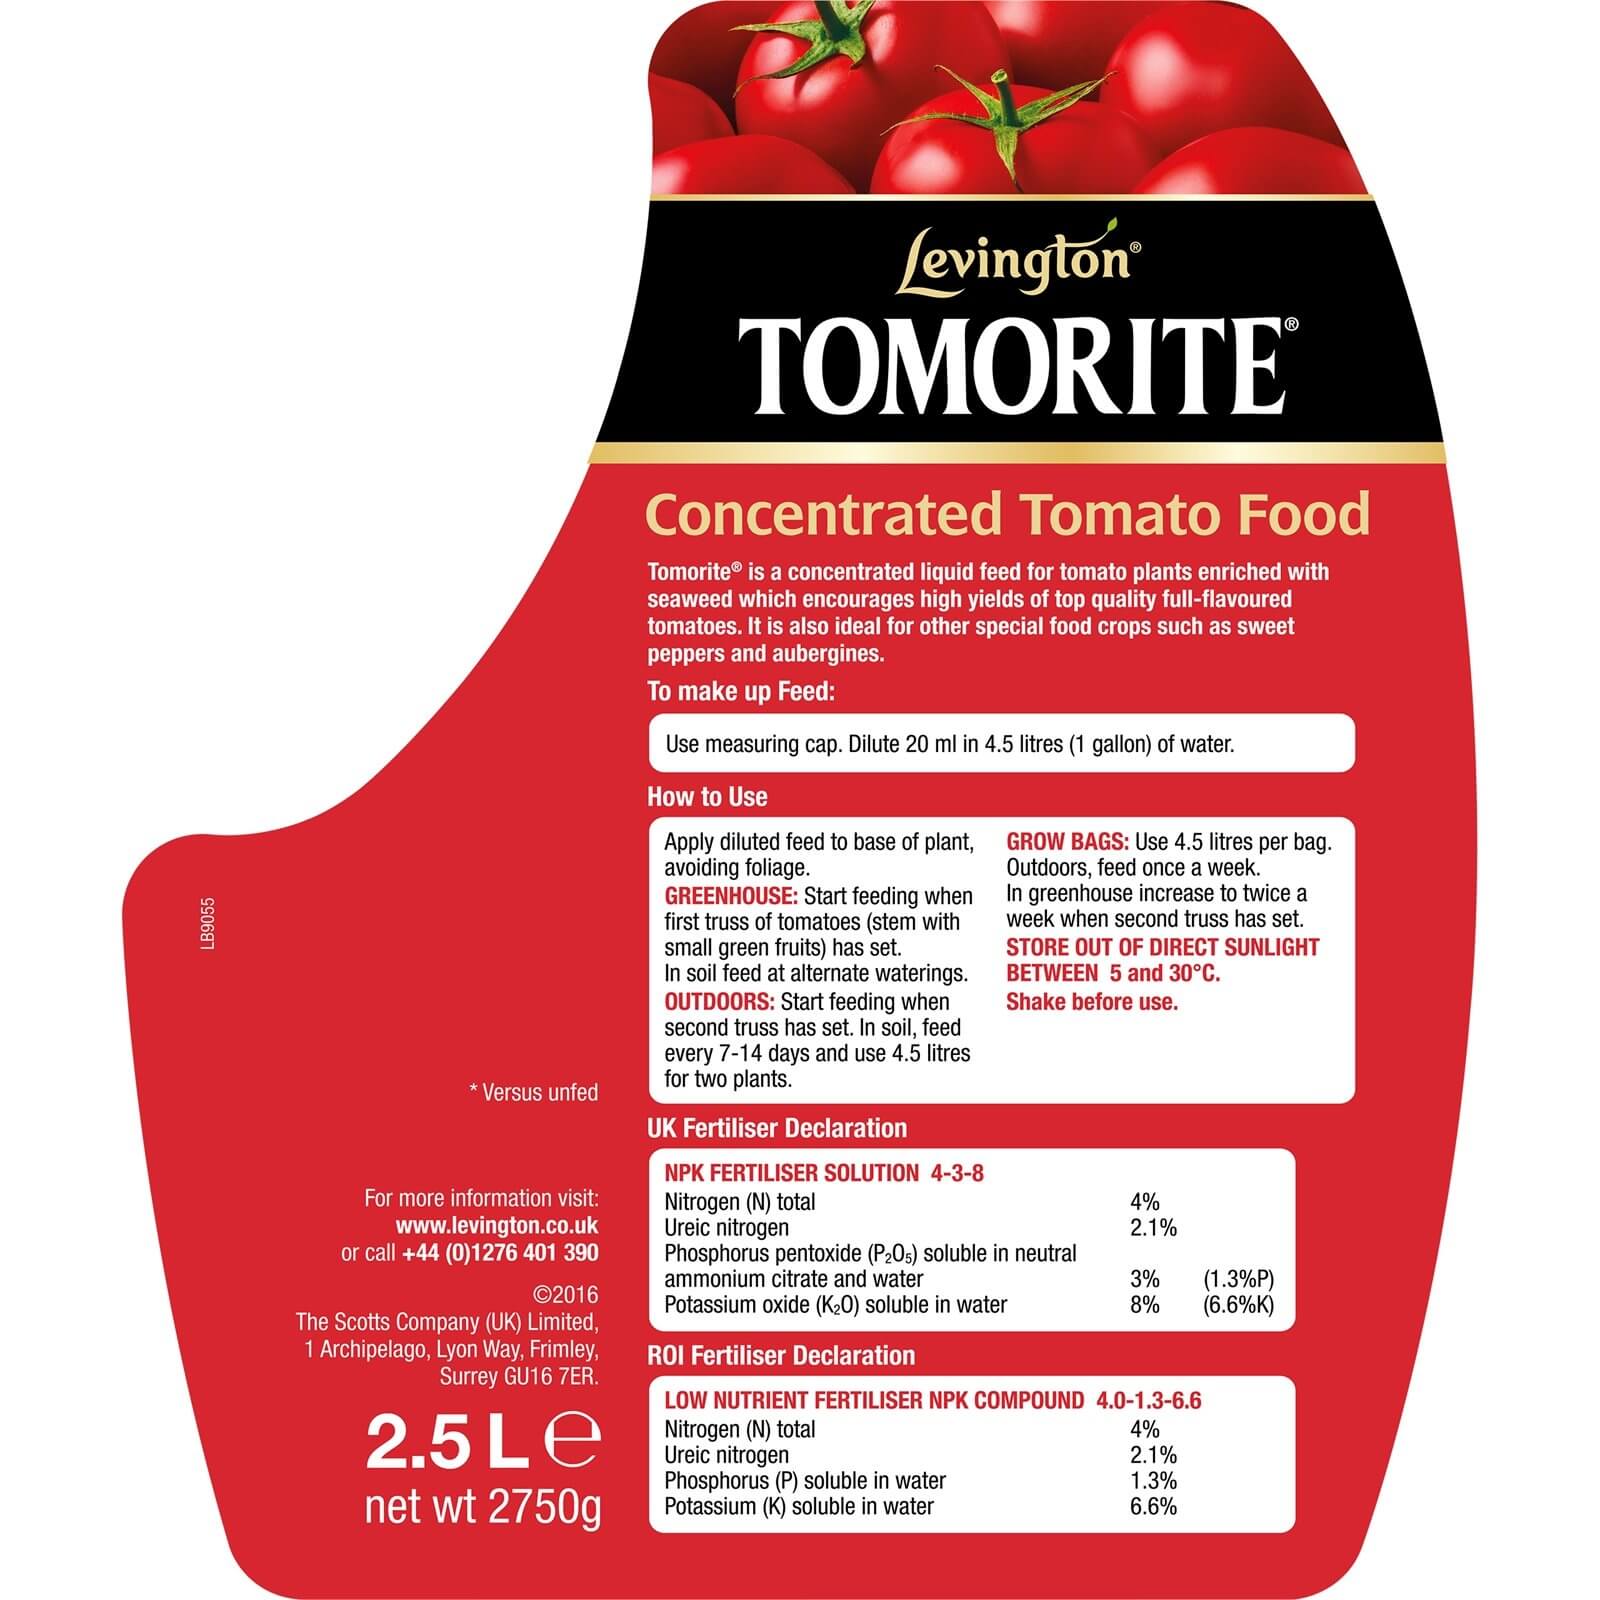 Levington Tomorite Concentrated Tomato Plant Food With Seaweed Extract - 2.5L